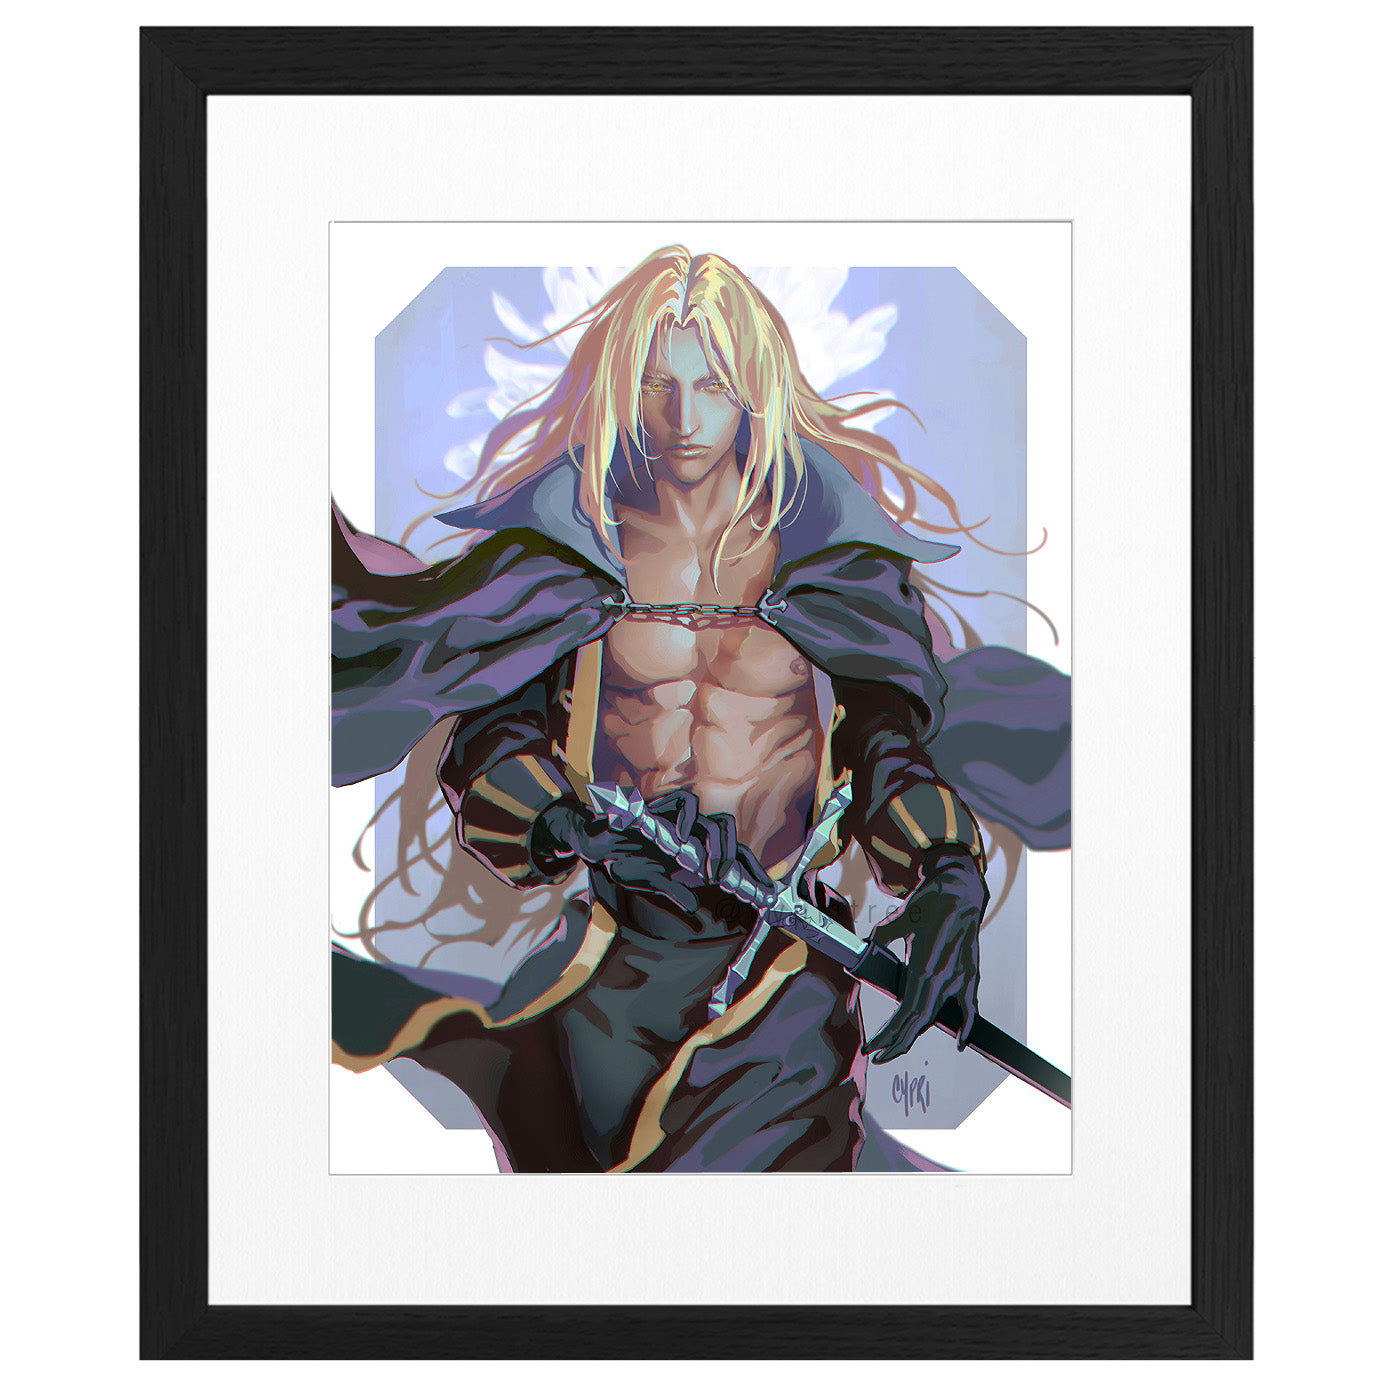 Amazon.com: Anime Hellsing Home Decor Wall Scroll Poster Fabric Painting  Alucard / Seras Victoria /RUINS 23.6 x 31.5 Inches-21: Posters & Prints